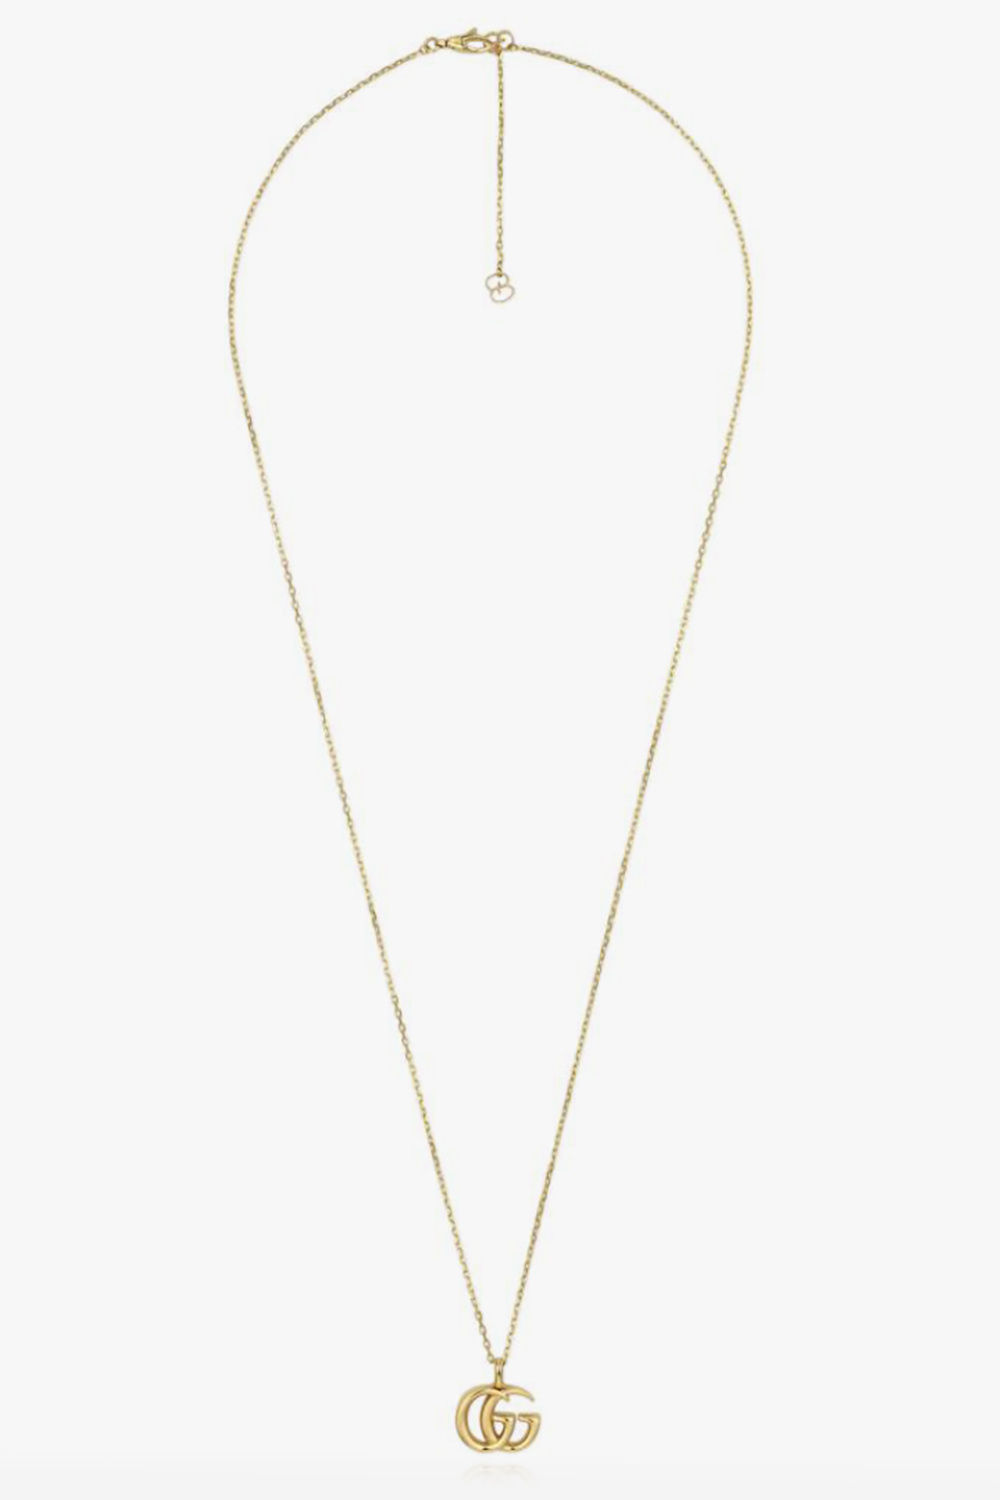 Gucci Yellow gold necklace